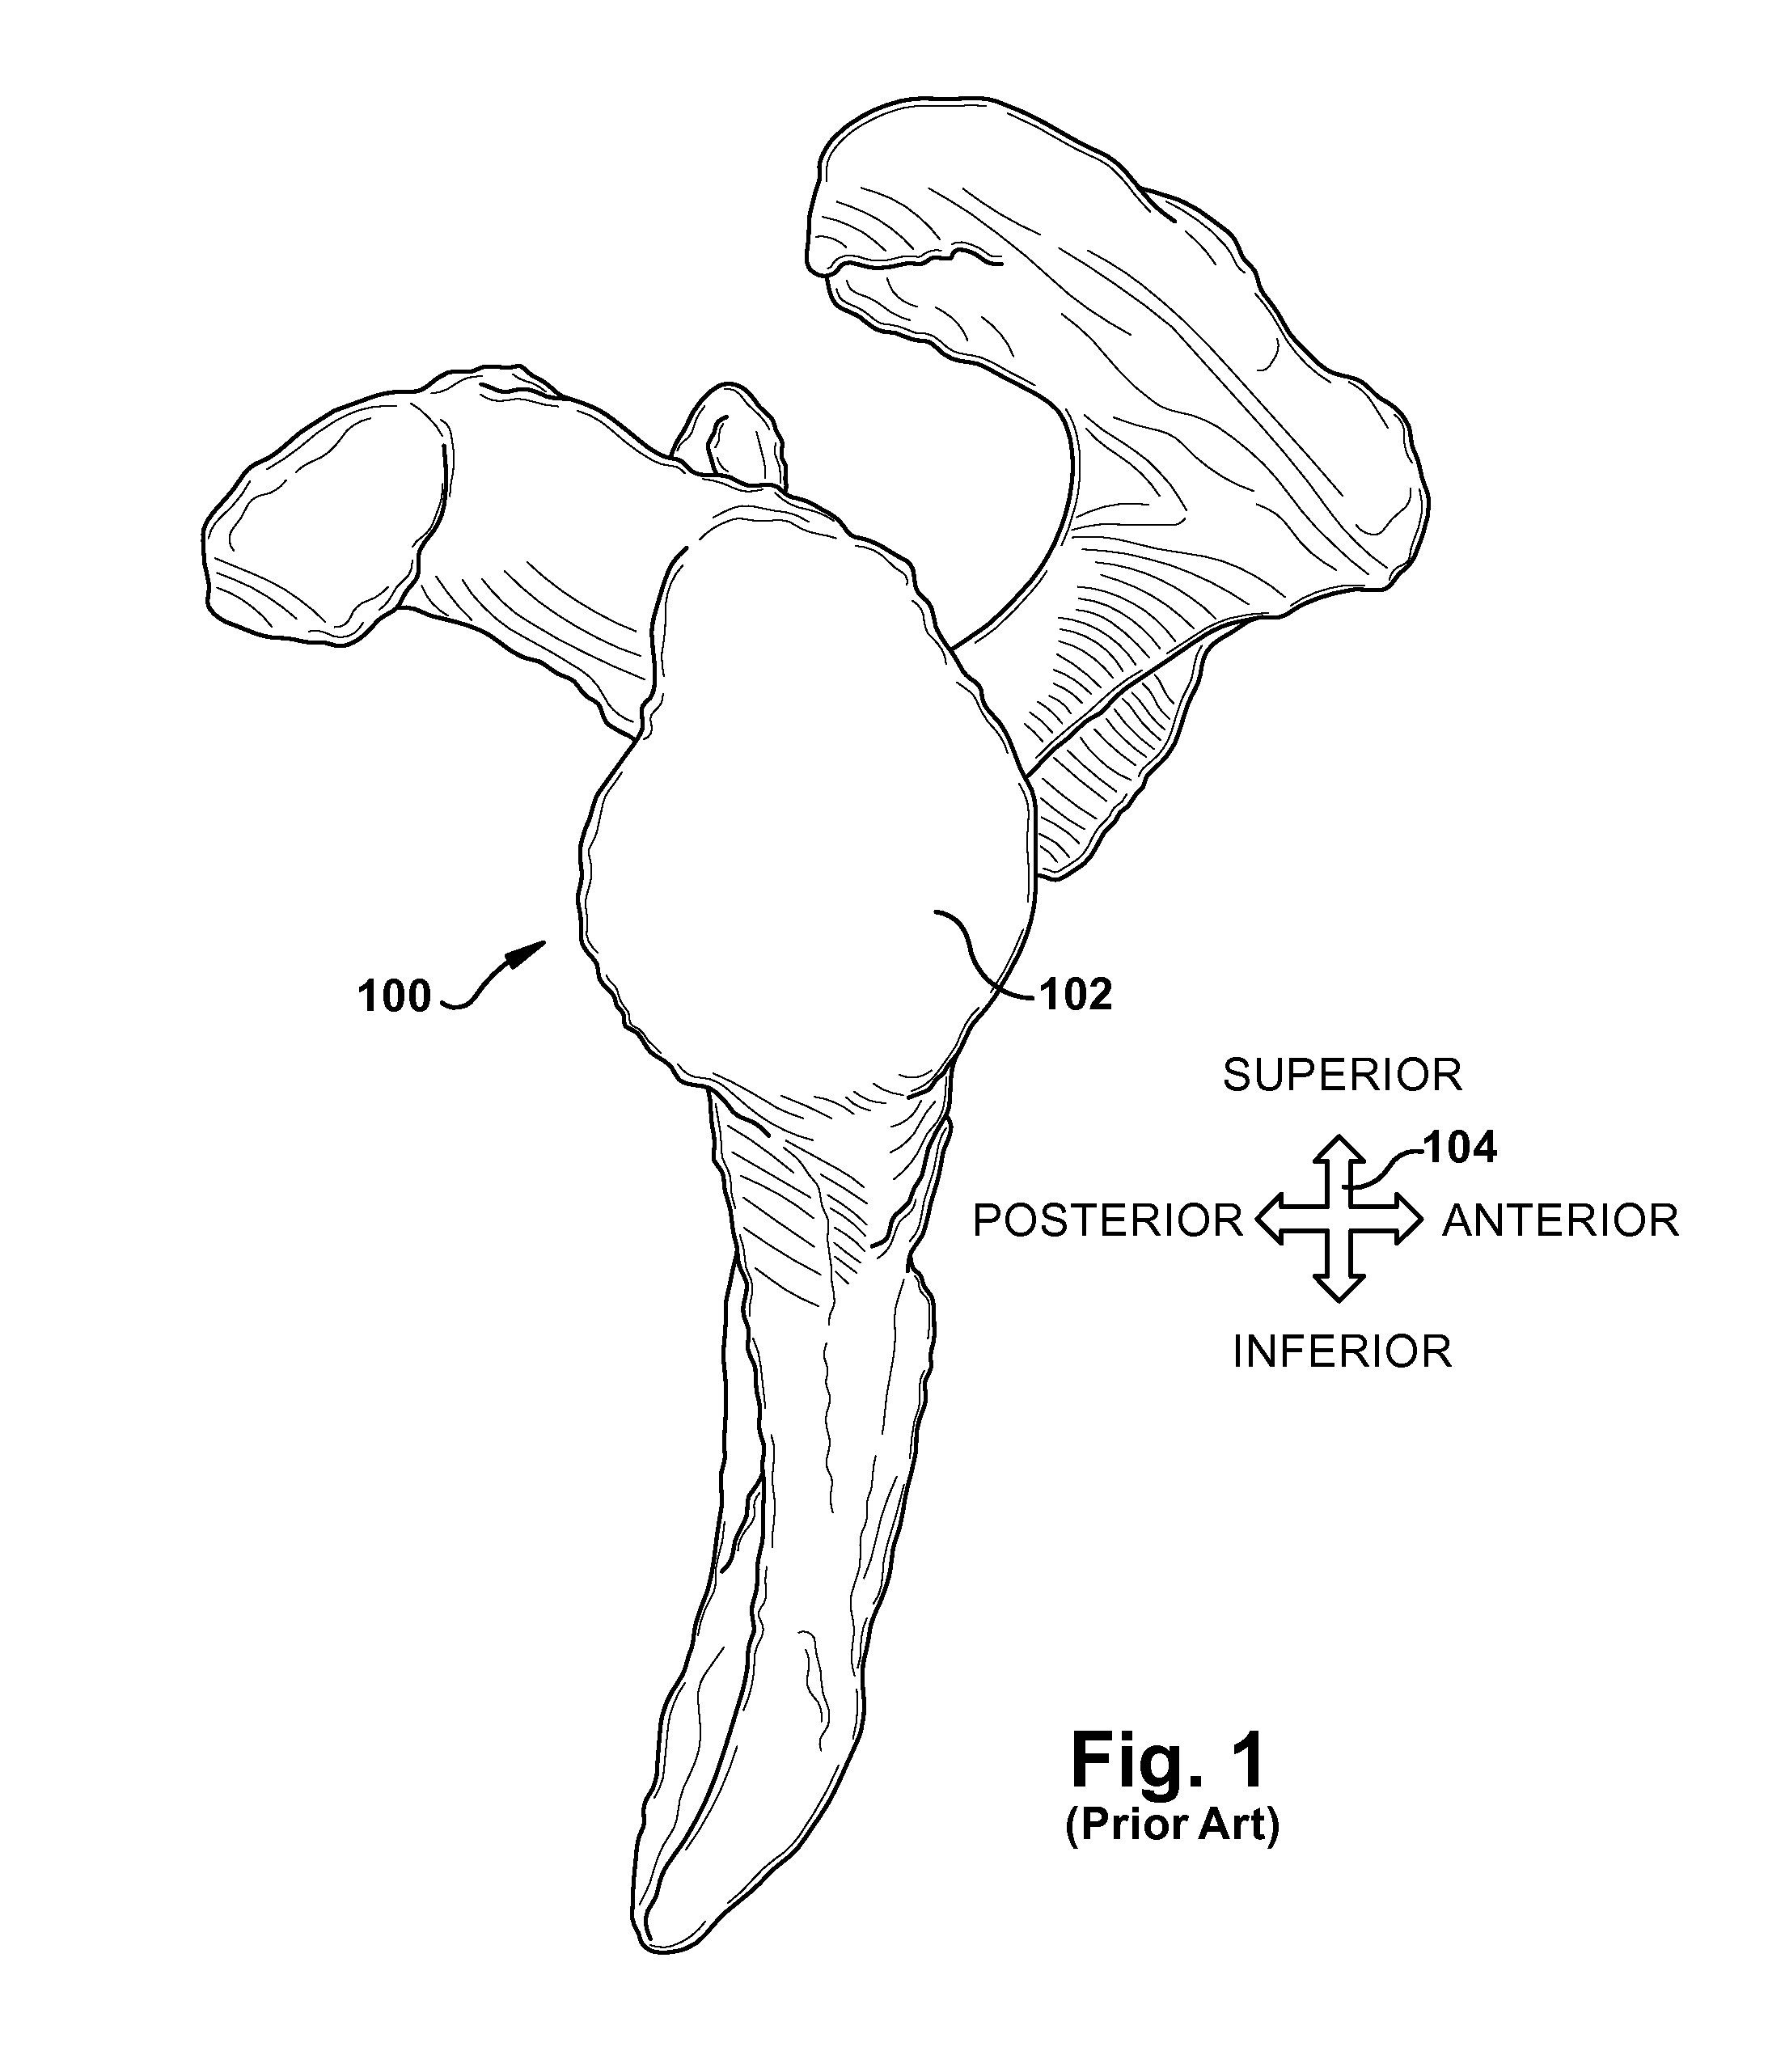 System and method for assisting with arrangement of a stock instrument with respect to a patient tissue